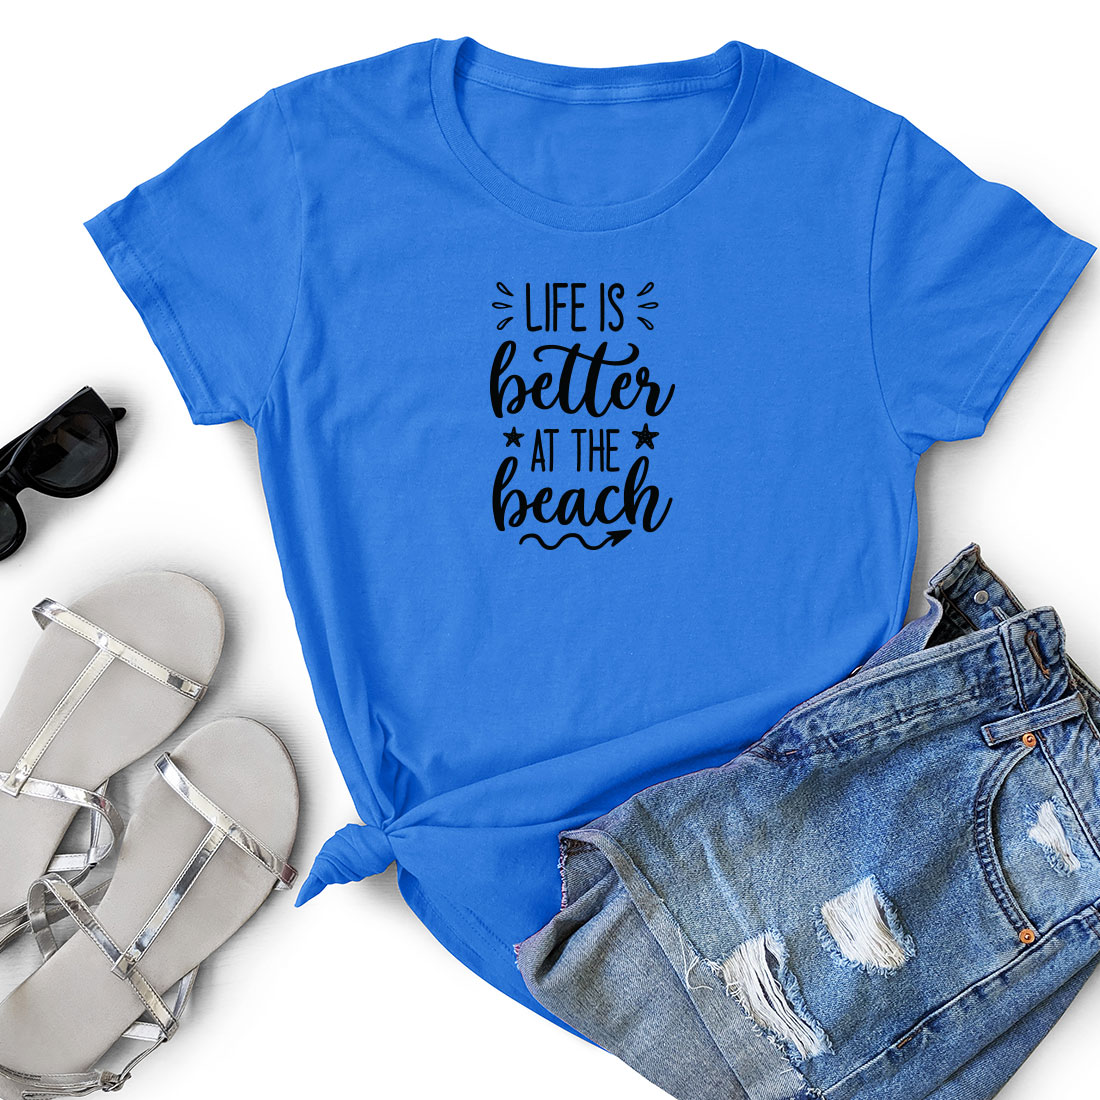 T - shirt that says life is better at the beach.